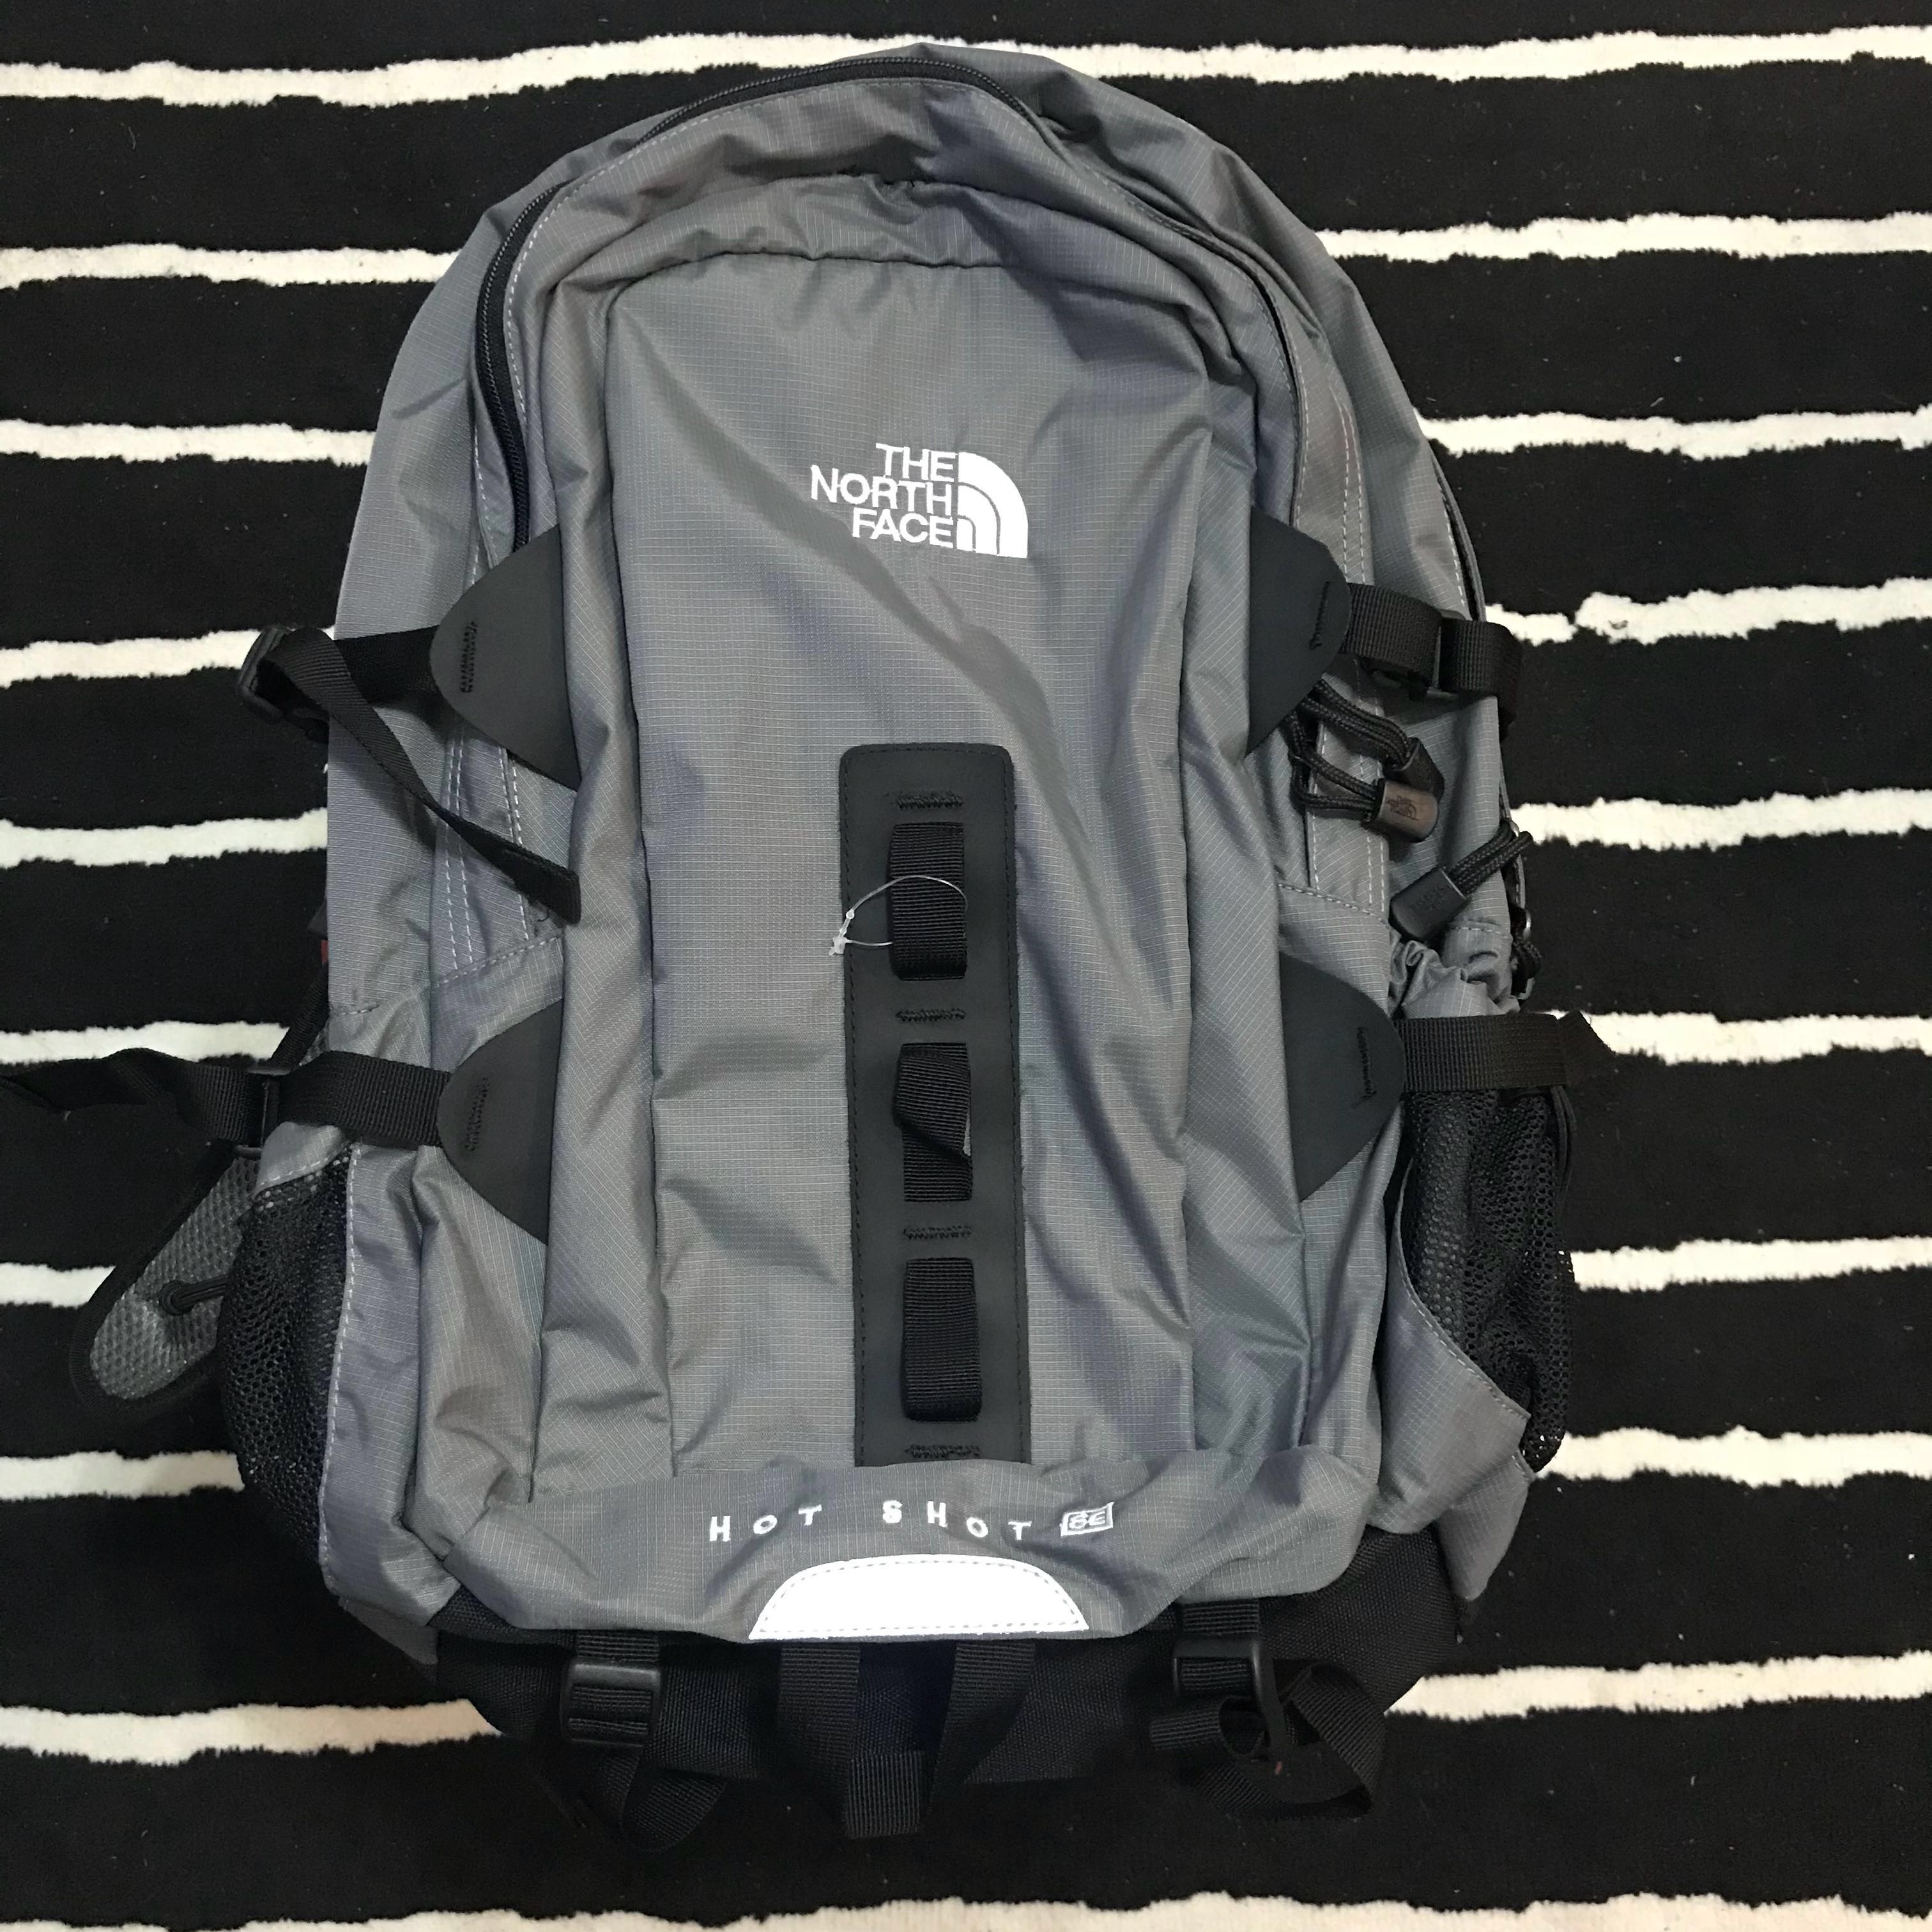 Northface Hot Shot Backpack Men S Fashion Bags Wallets Backpacks On Carousell